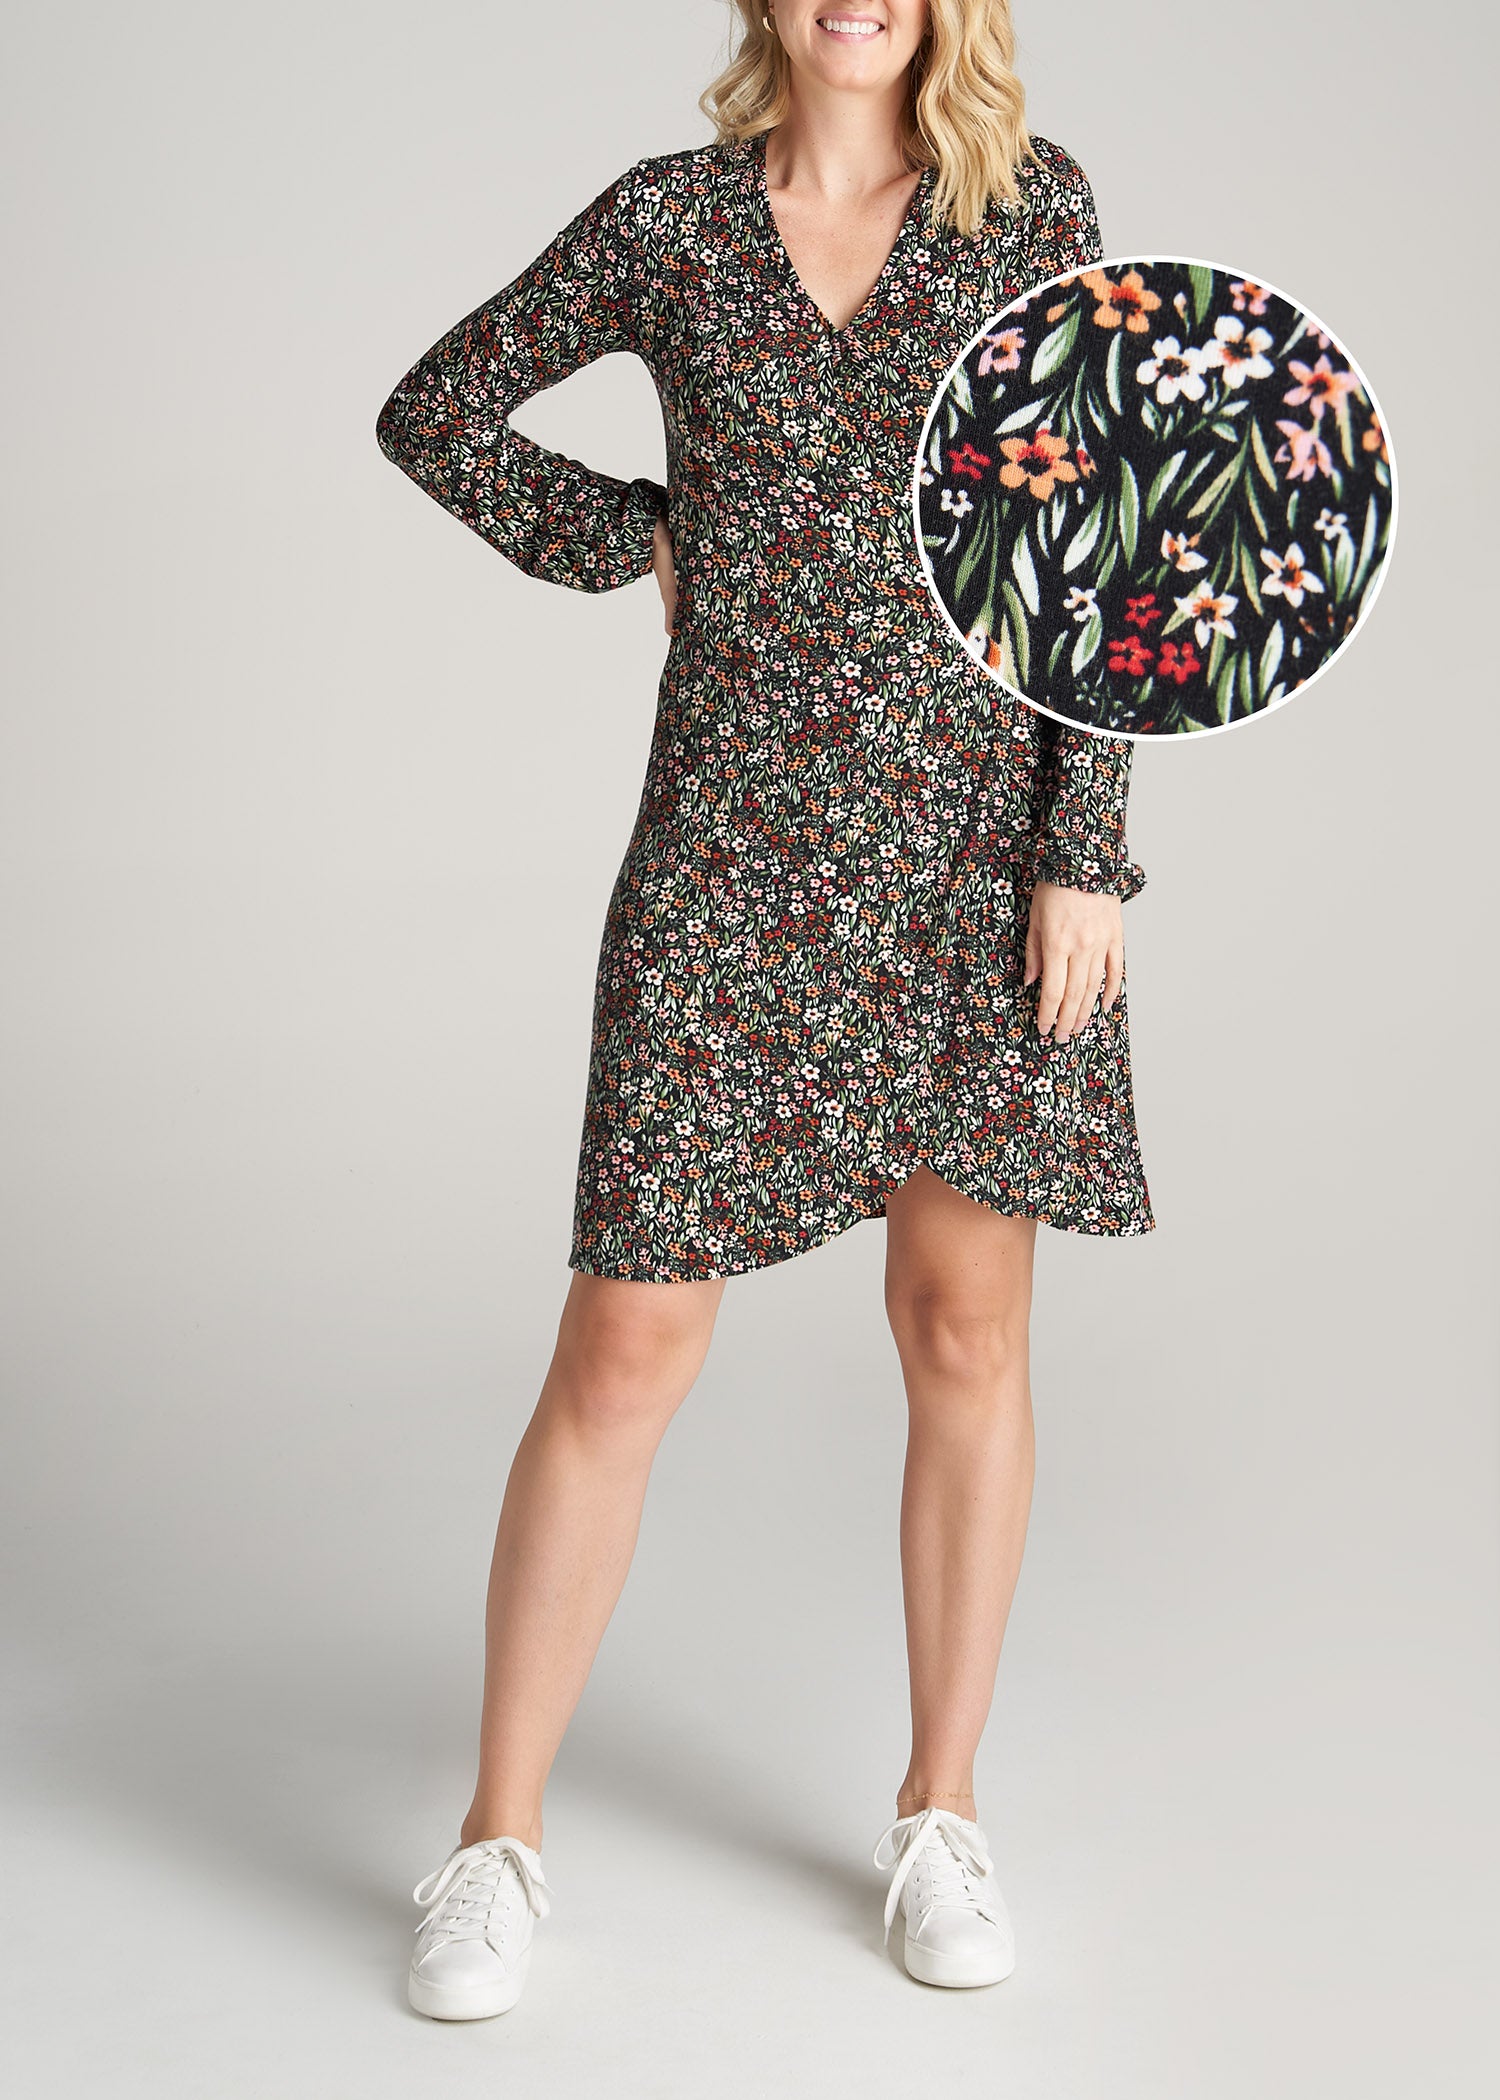 Long Sleeve Jersey Wrap Dress for Tall Women in Black Floral